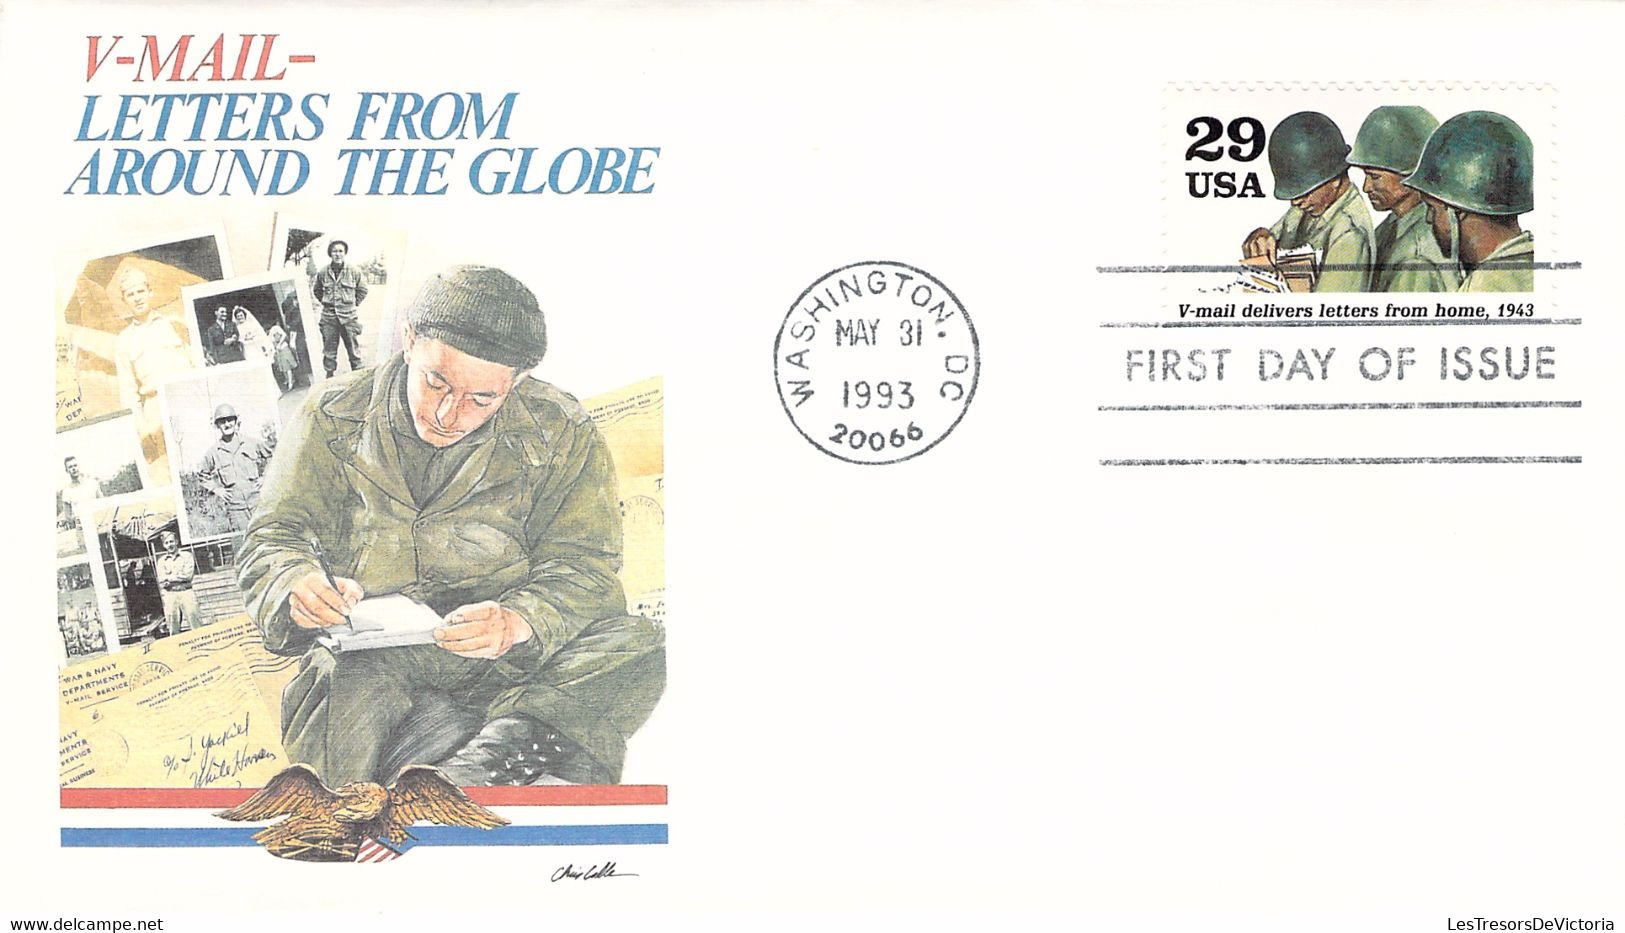 Lettre Premier Jour - First Day Fo Issue - V-mail Delivers Letters From Home 1943 - Washington 1993 - Militares